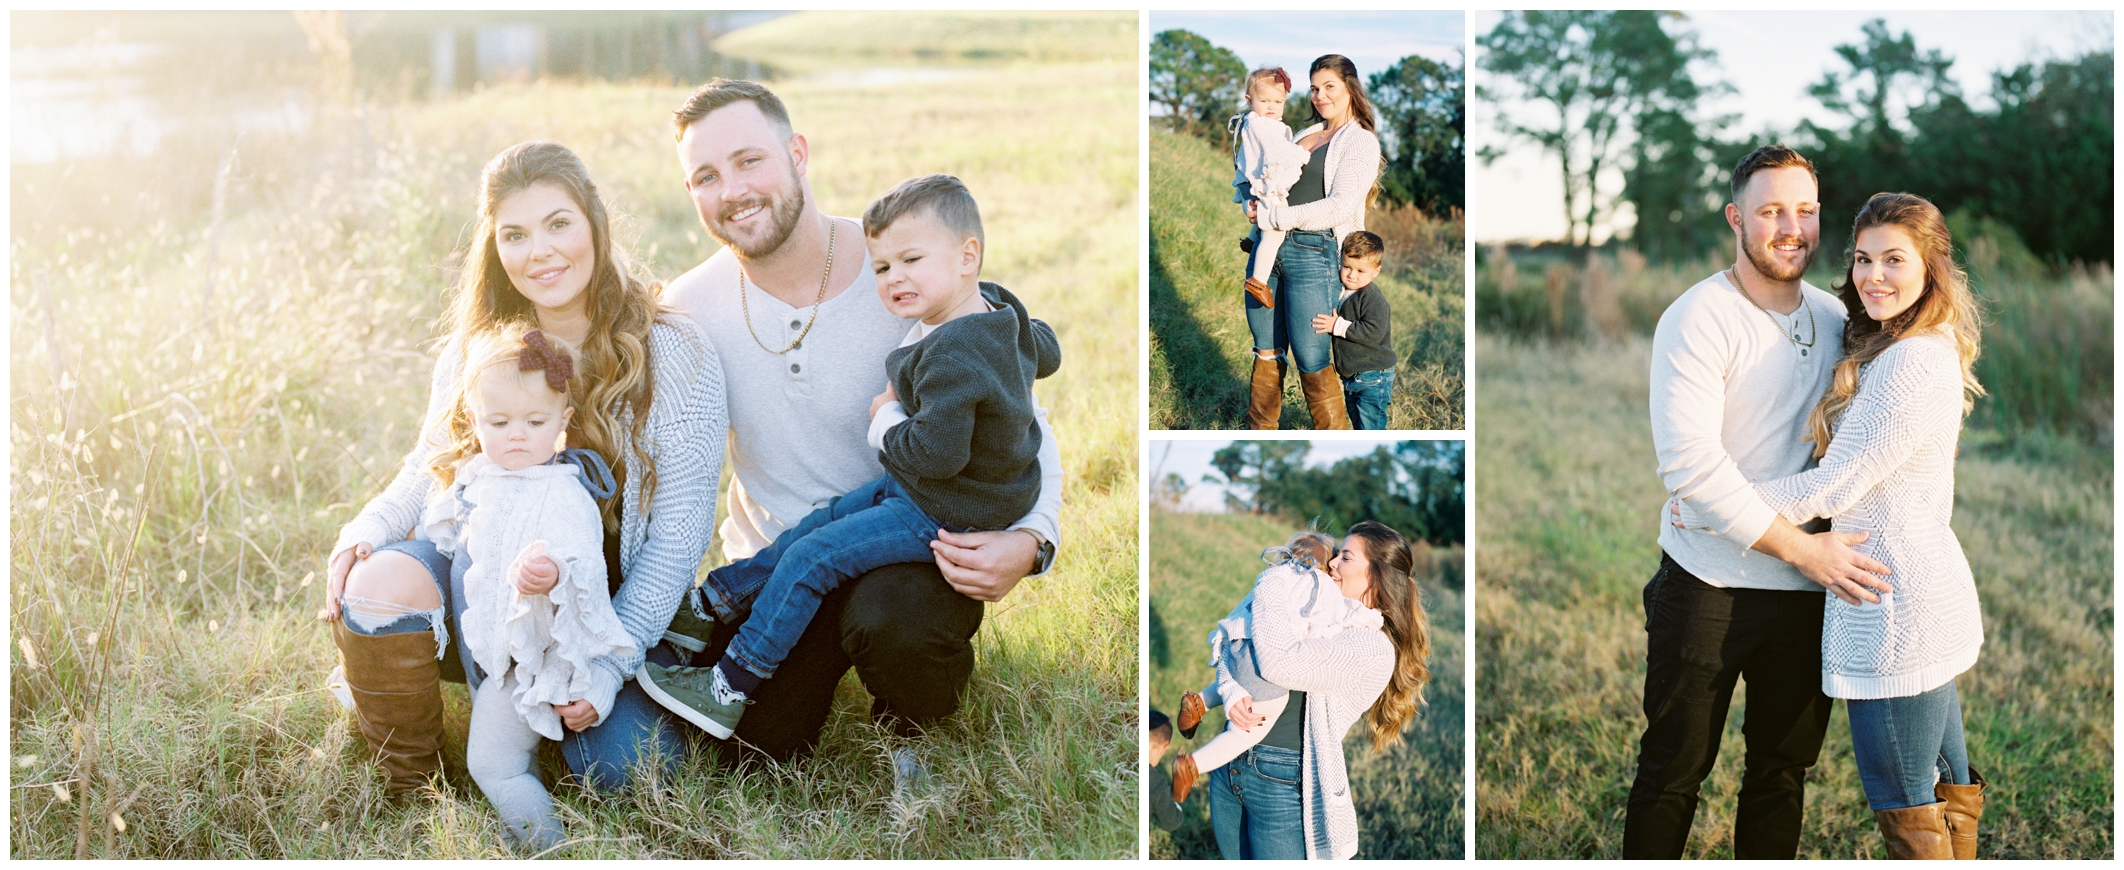 Lisa Silva Photography- Ponte Vedra Beach, St. Augustine and Jacksonville, Florida Fine Art Film Destination Wedding Photography- Family Lifestyle Session in St. Augustine_0027.jpg